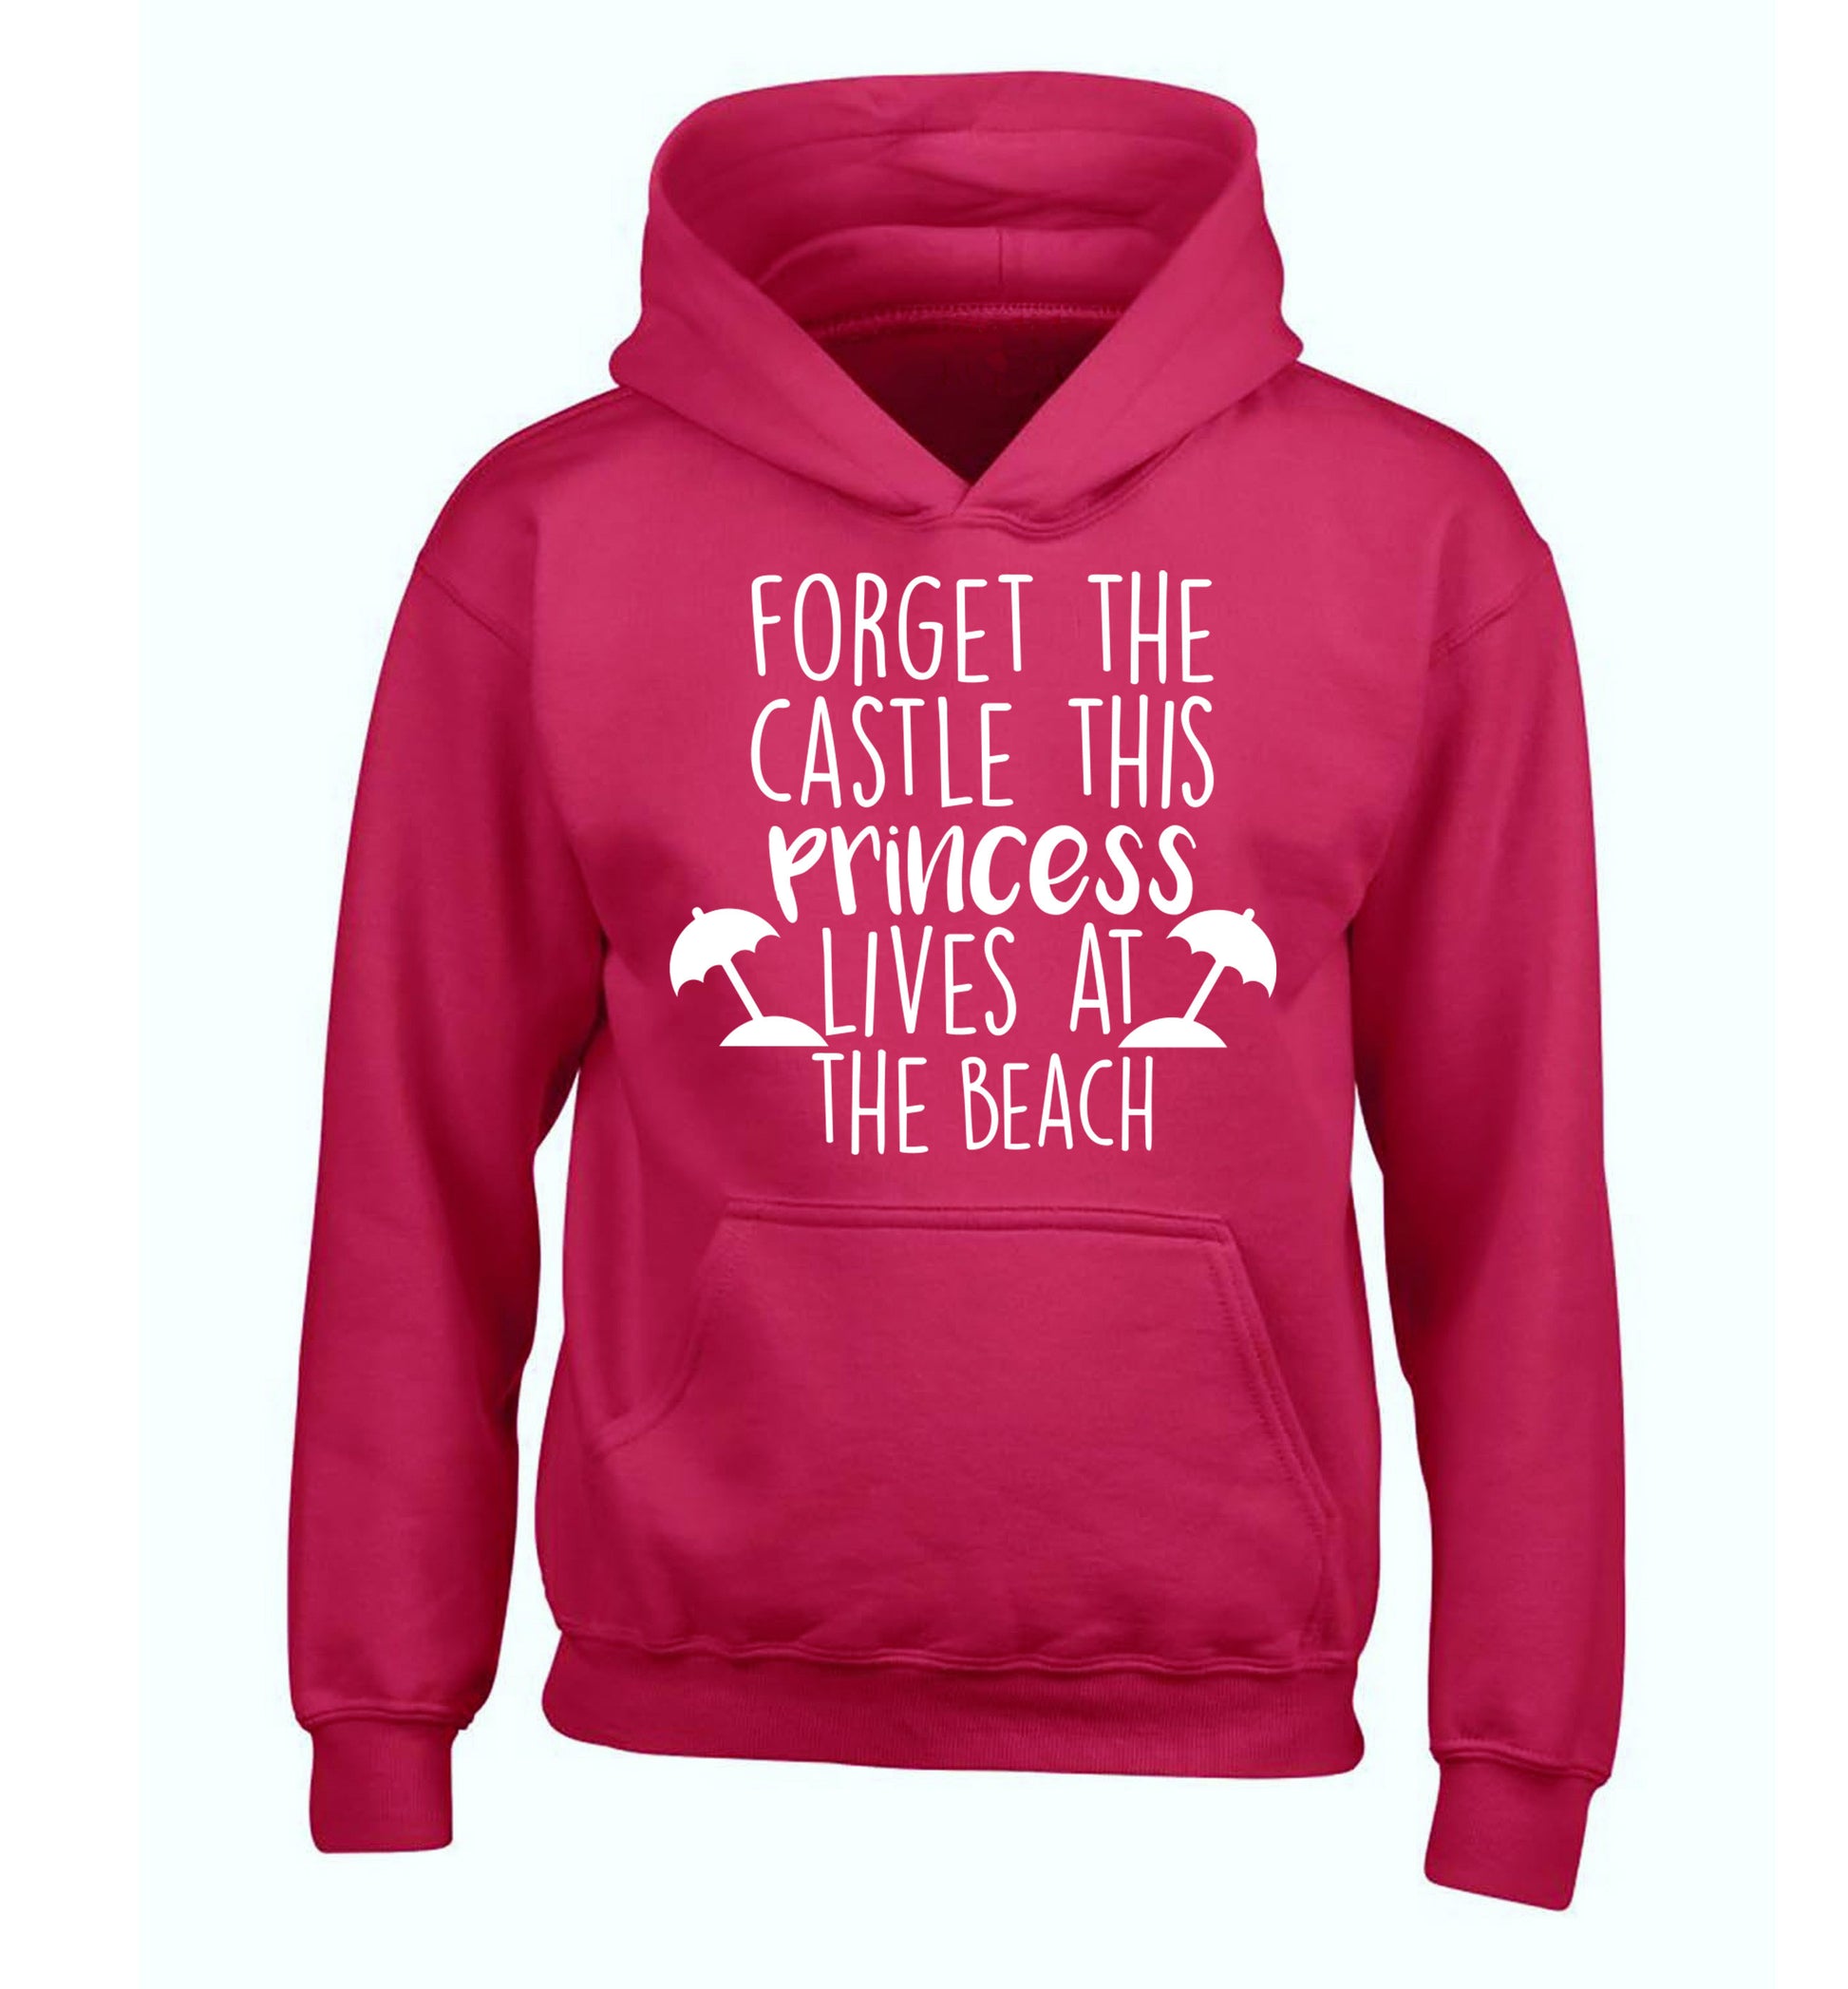 Forget the castle this princess lives at the beach children's pink hoodie 12-14 Years